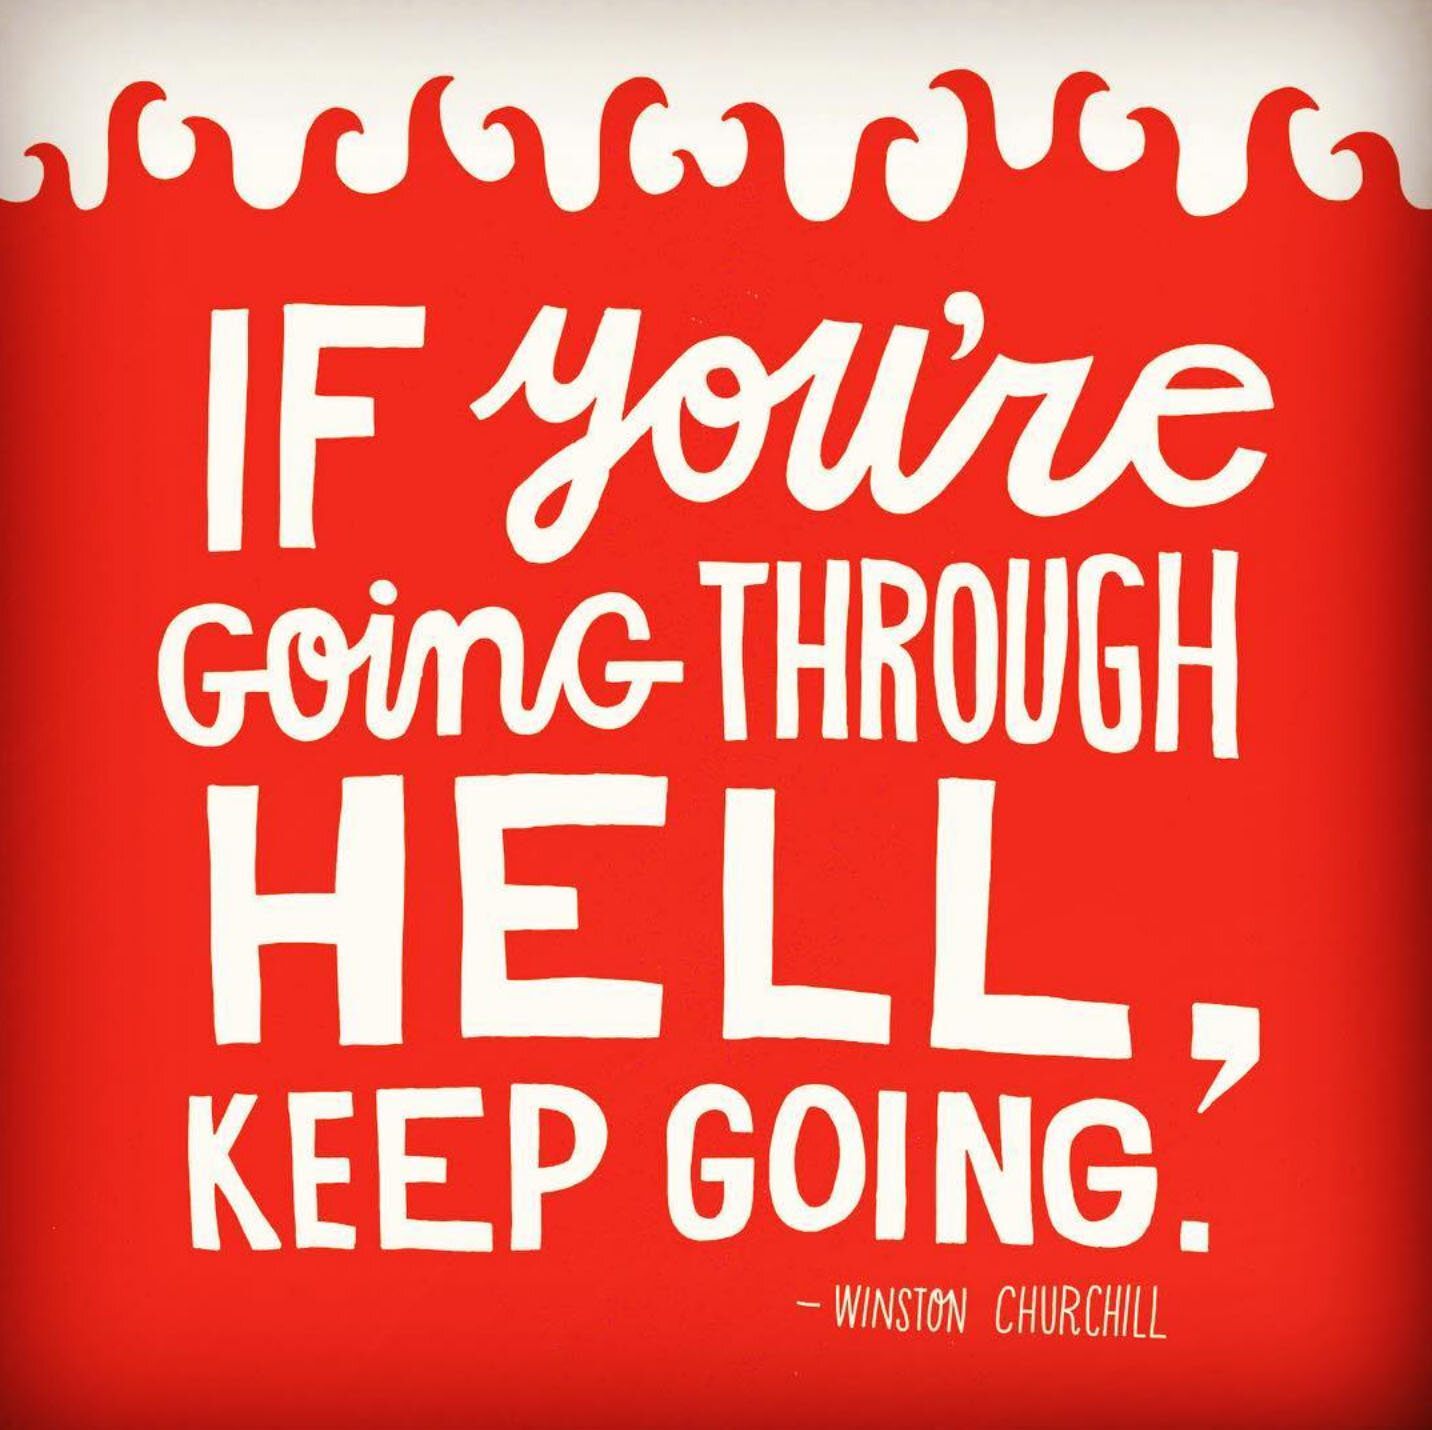 If you can keep your. If you going through Hell keep going. Churchill if you're going through Hell keep. Keep going Wallpaper. When you are going through Hell, keep going.